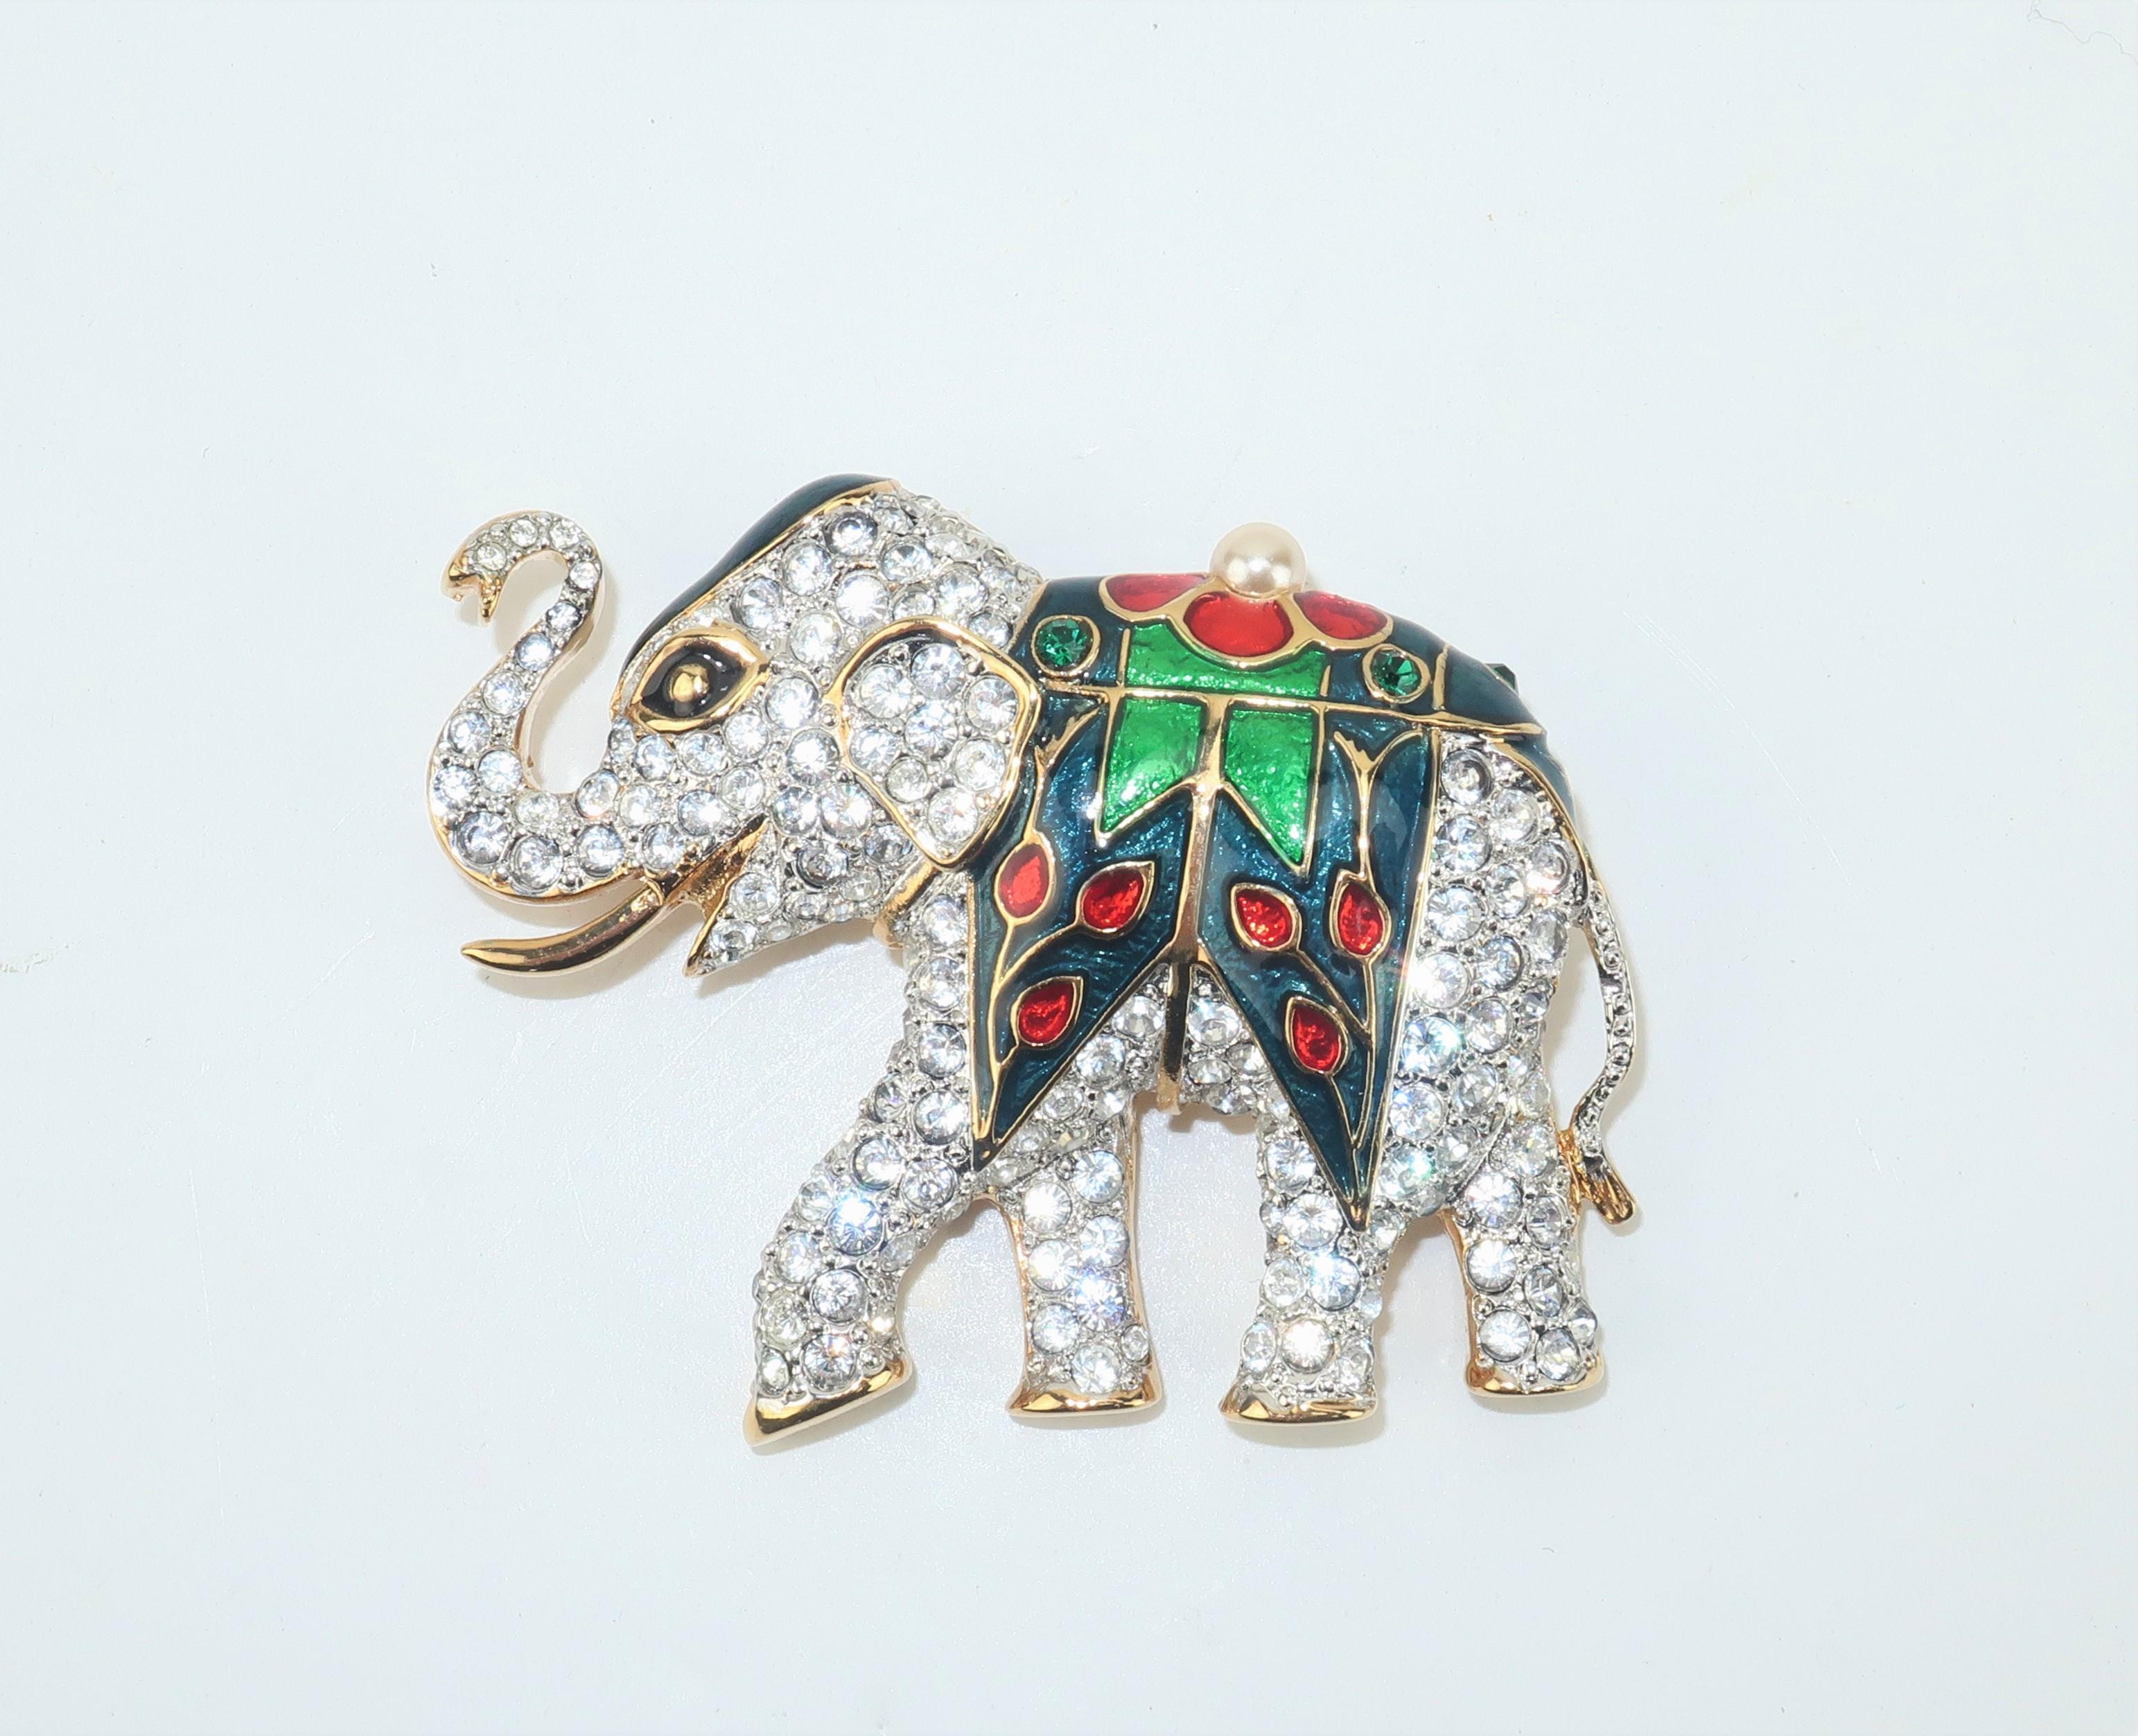 This elephant brooch has a 'sparkling' personality that is sure to add charm to any lapel.  The gold tone elephant is embellished with crystal rhinestones and festooned with blue, red and green enamel and topped with a pearl.  It is outfitted with a